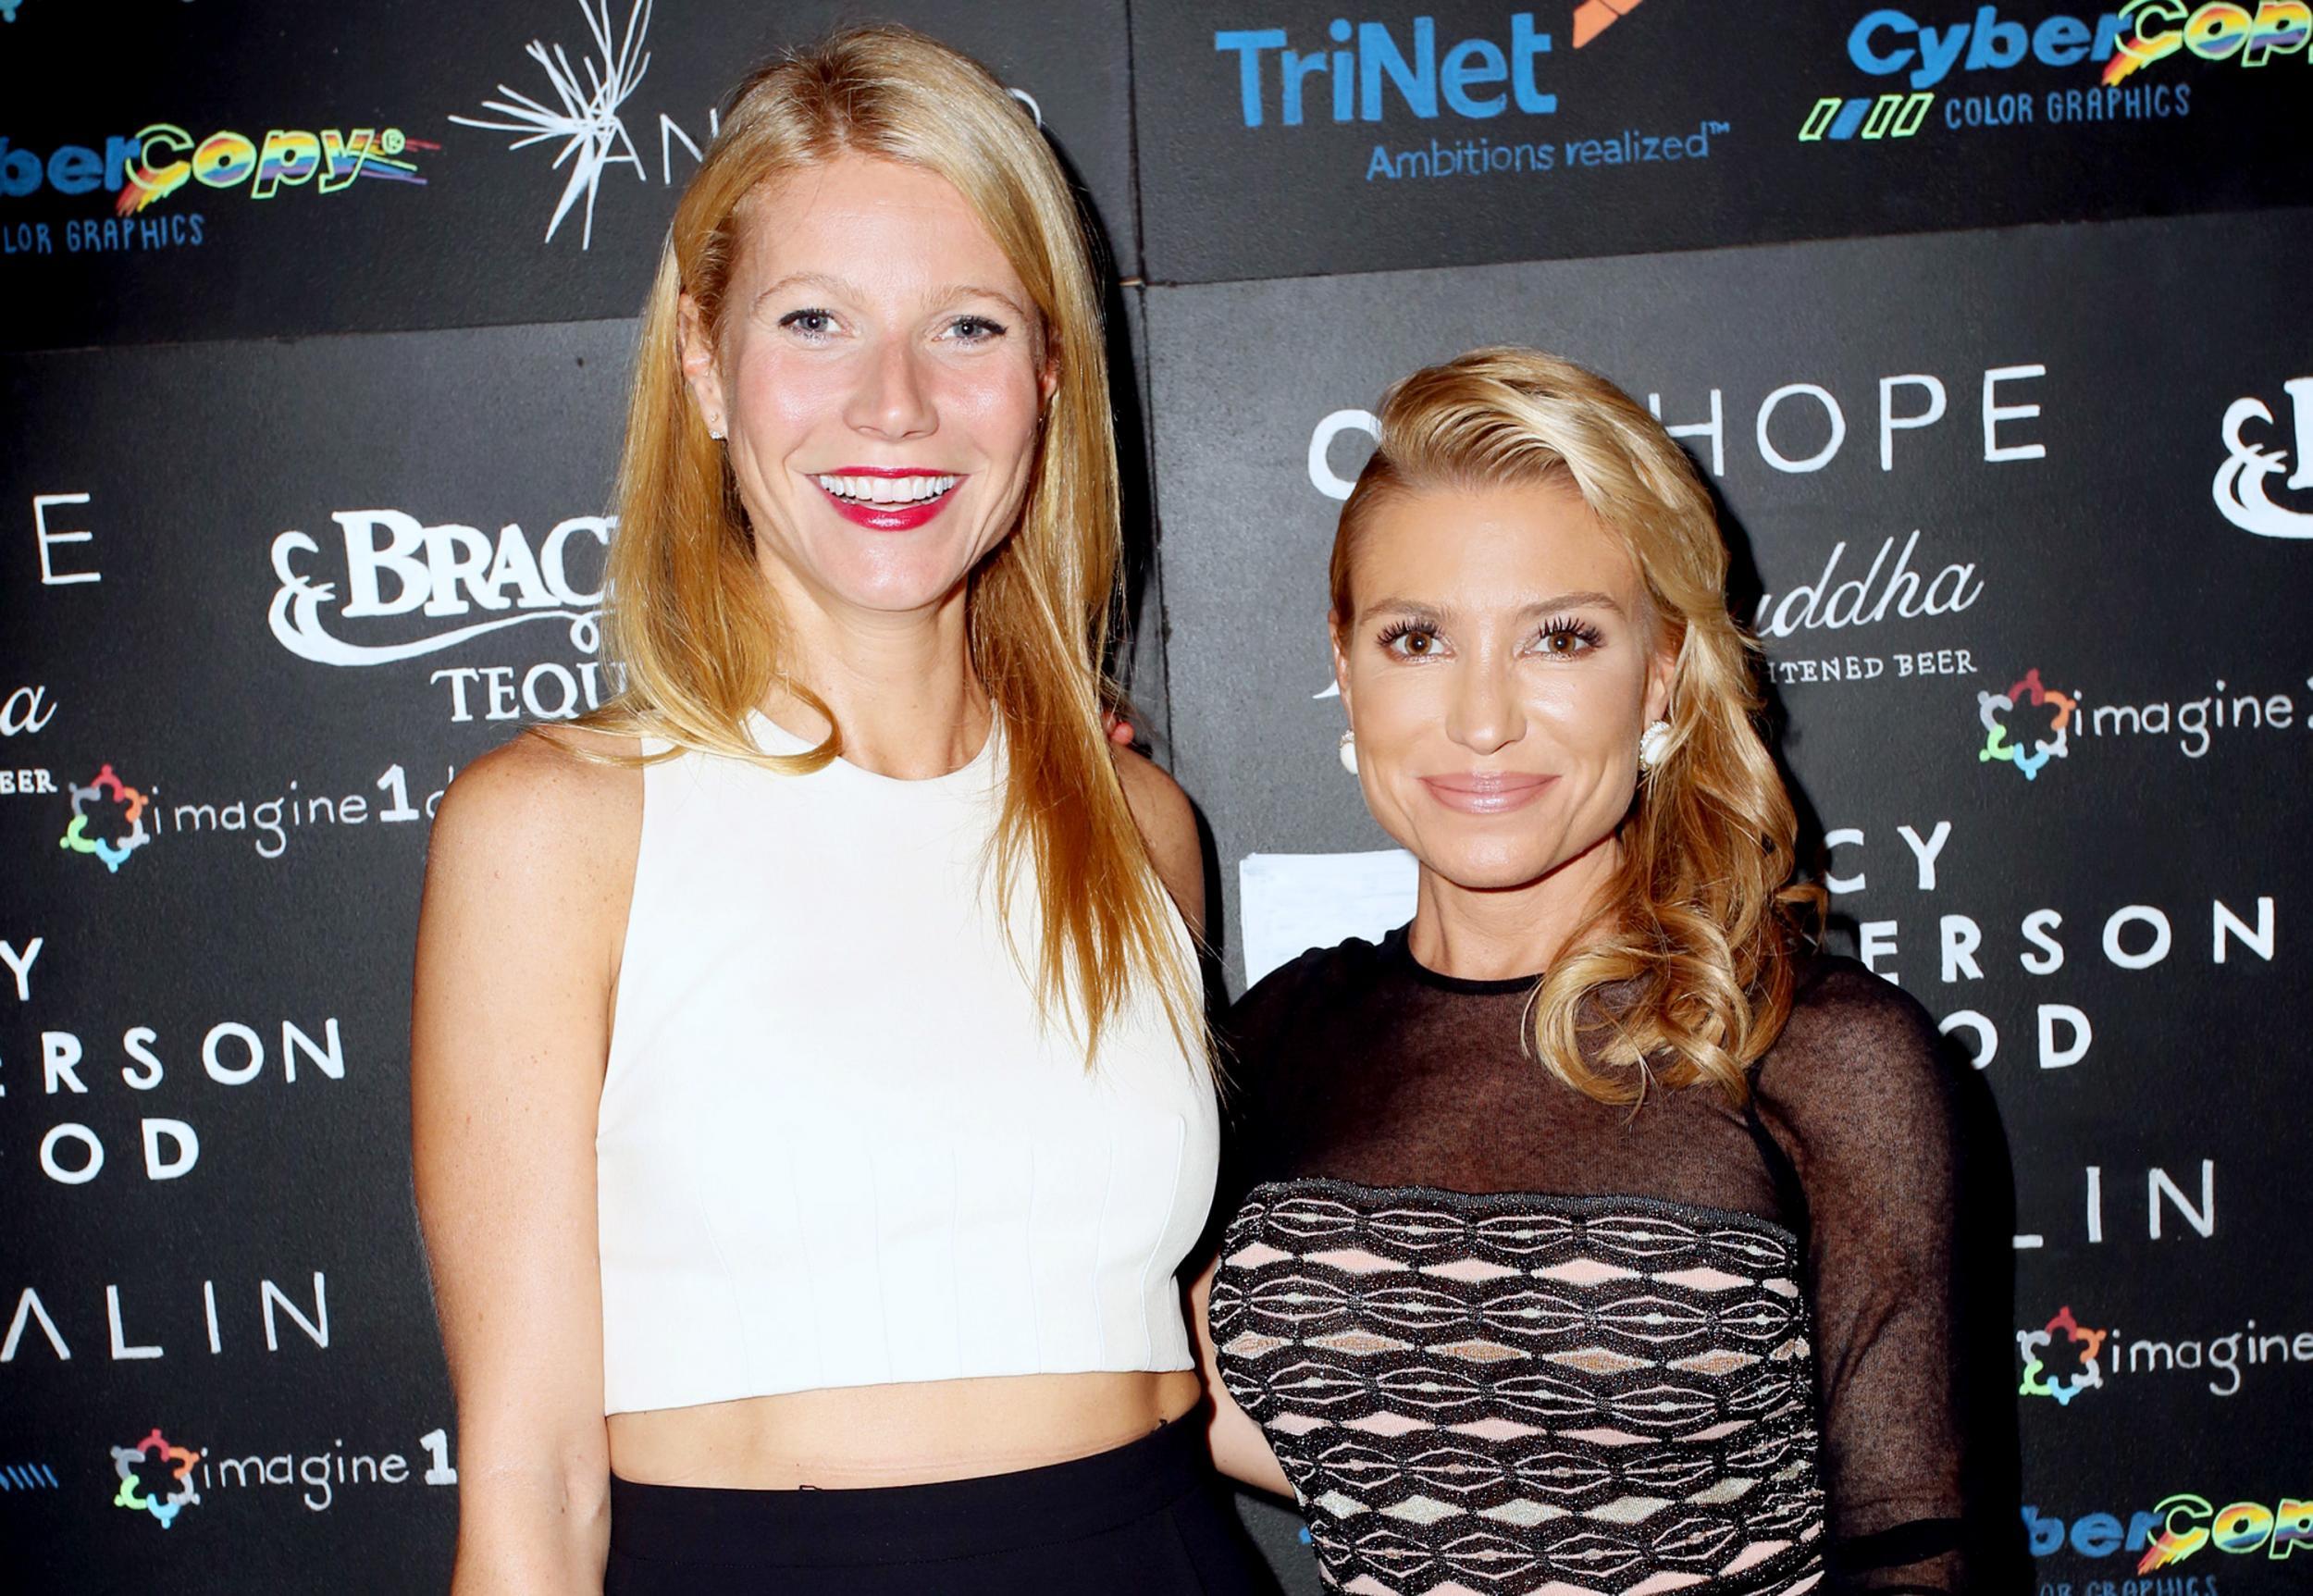 Tracy Anderson and Gwyneth Paltrow want you to know they're super good friends